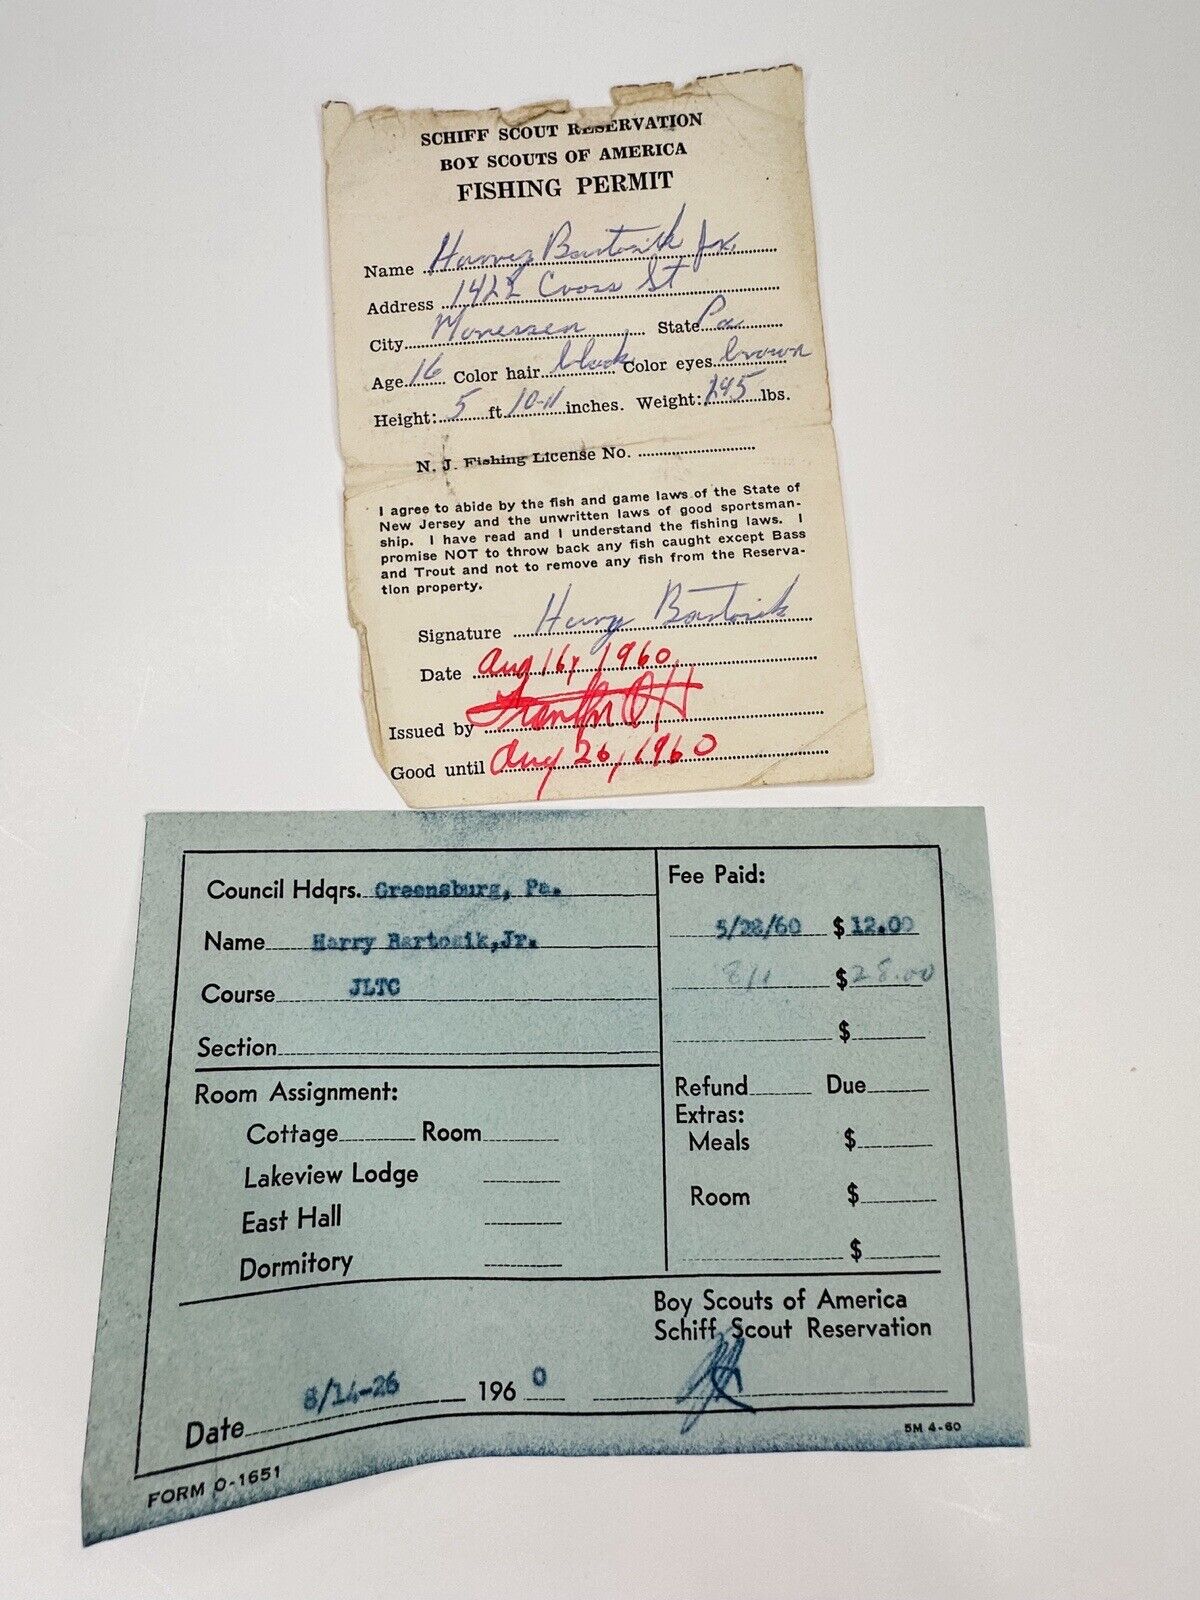 Schiff Scout Reservation Boy Scouts of America Fishing Permit & Receipt 1960 